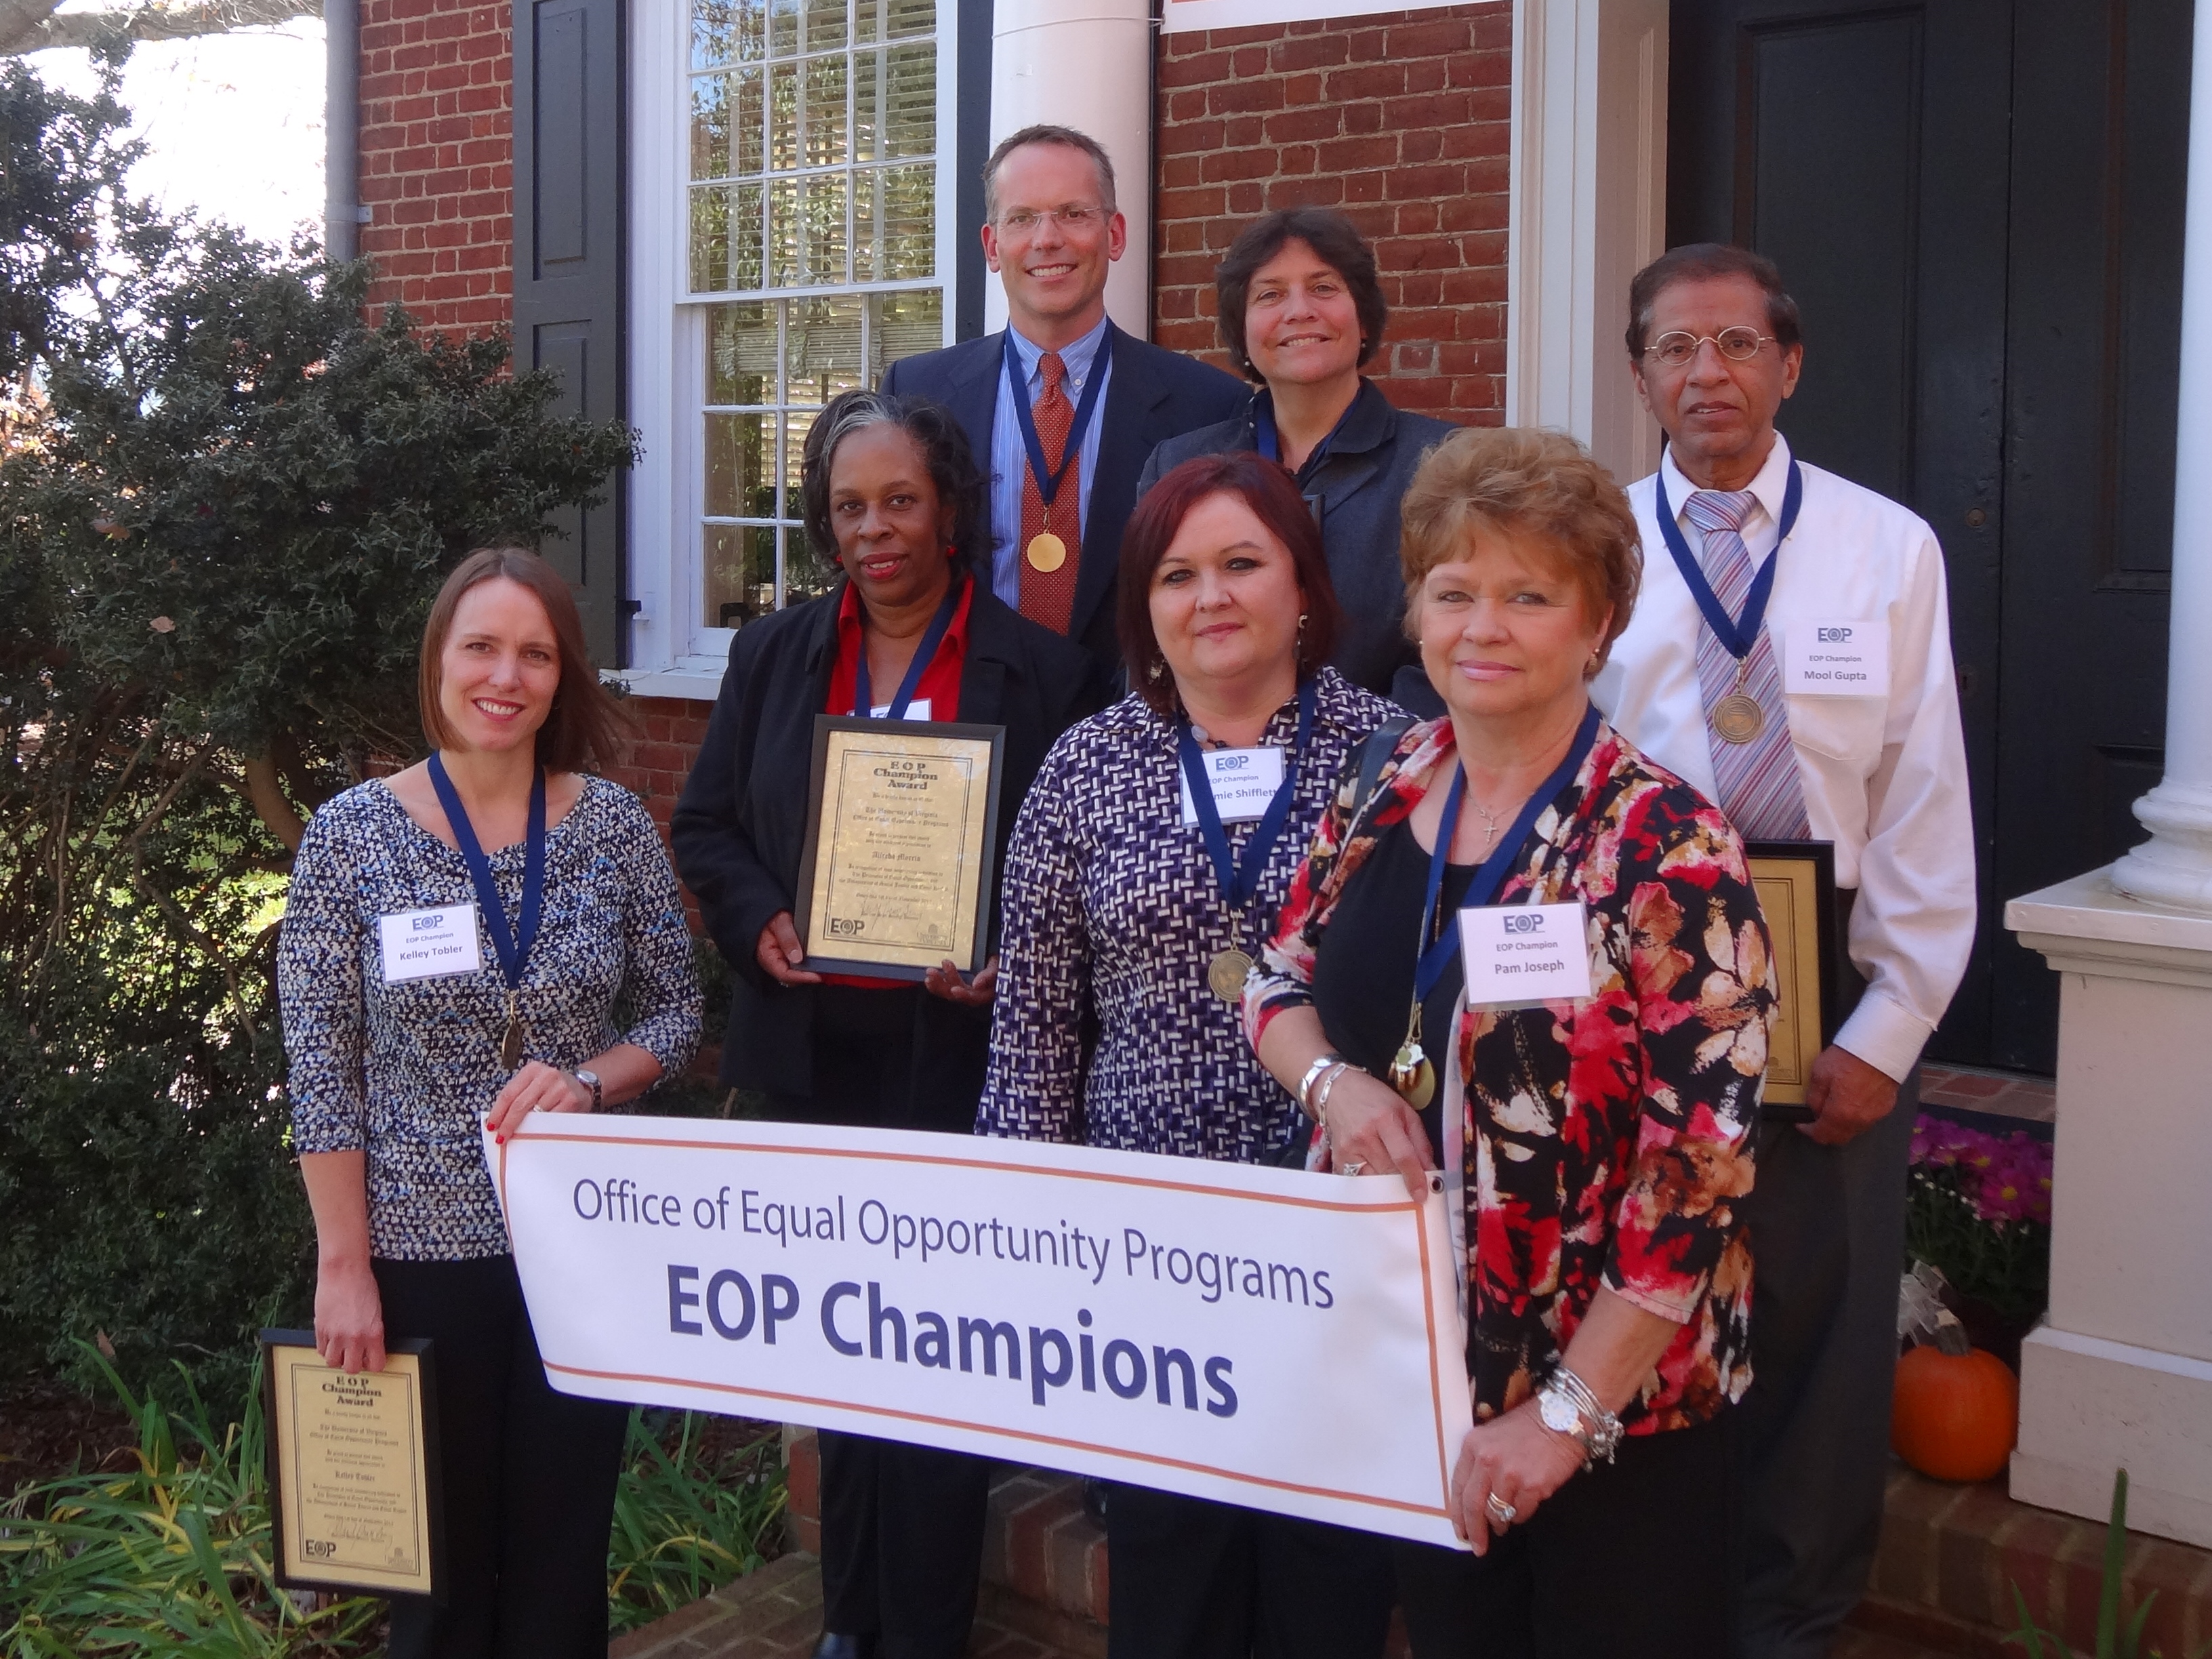 Group photo with a sign that says Office of Equal opportunity programs. EOP Champions